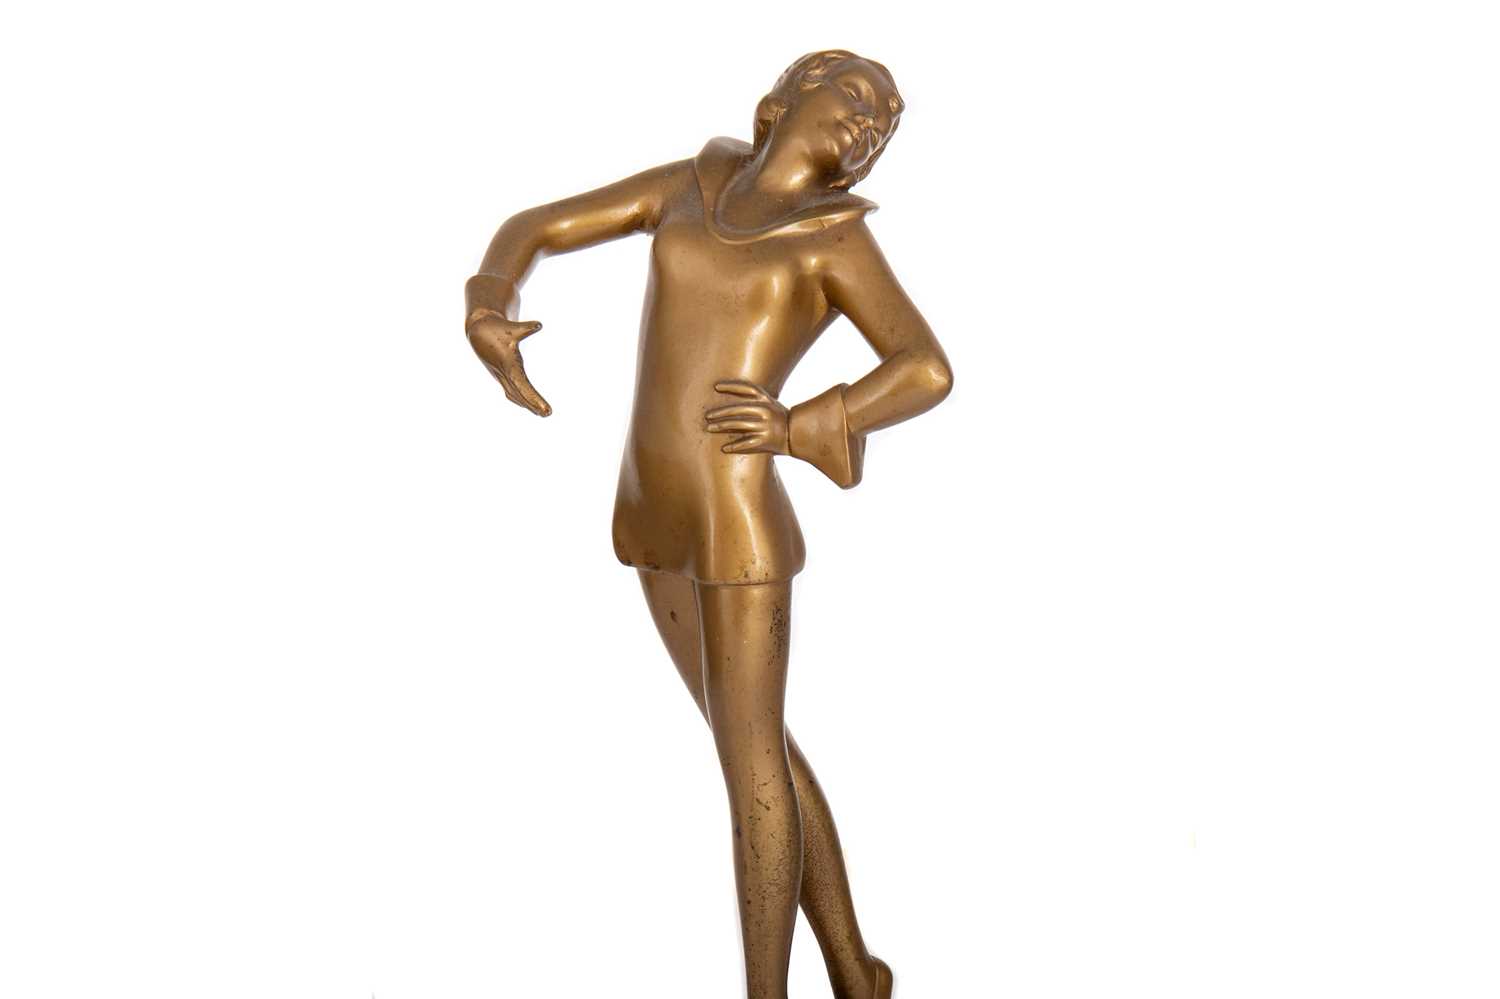 ART DECO FIGURE OF A BALLERINA, EARLY 20TH CENTURY - Image 2 of 16